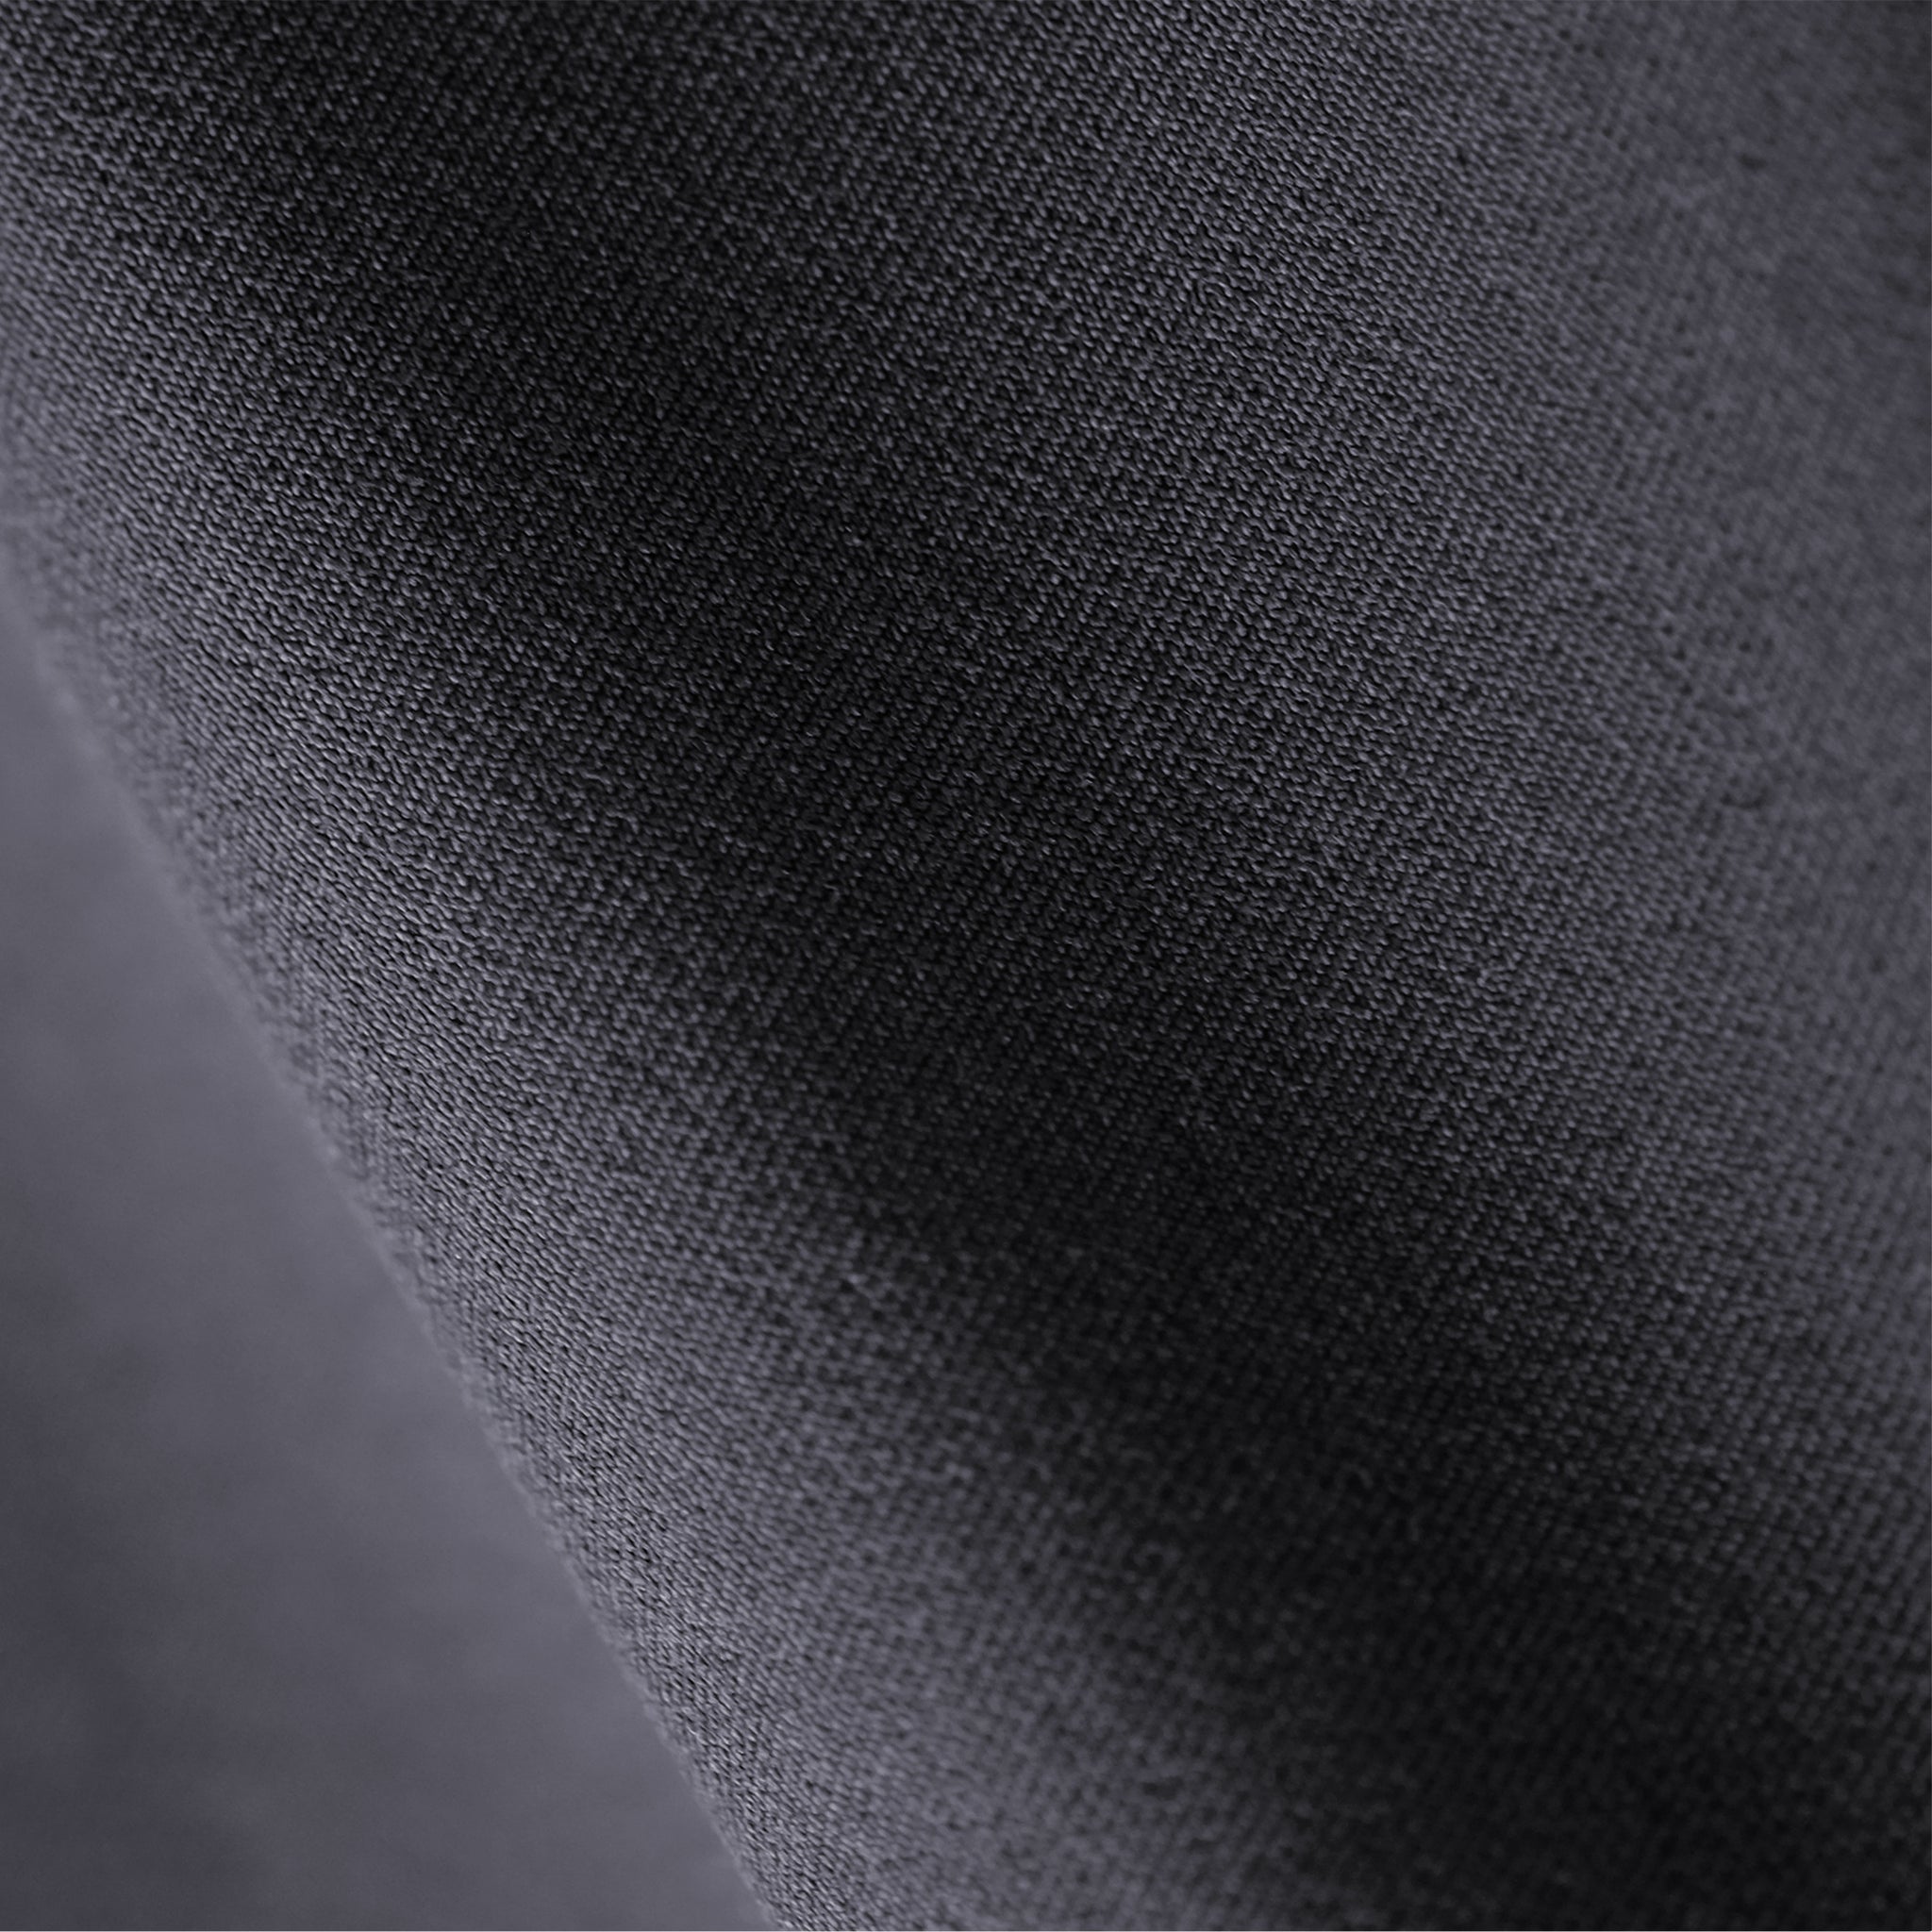 Close up image of better than denim fabric in charcoal